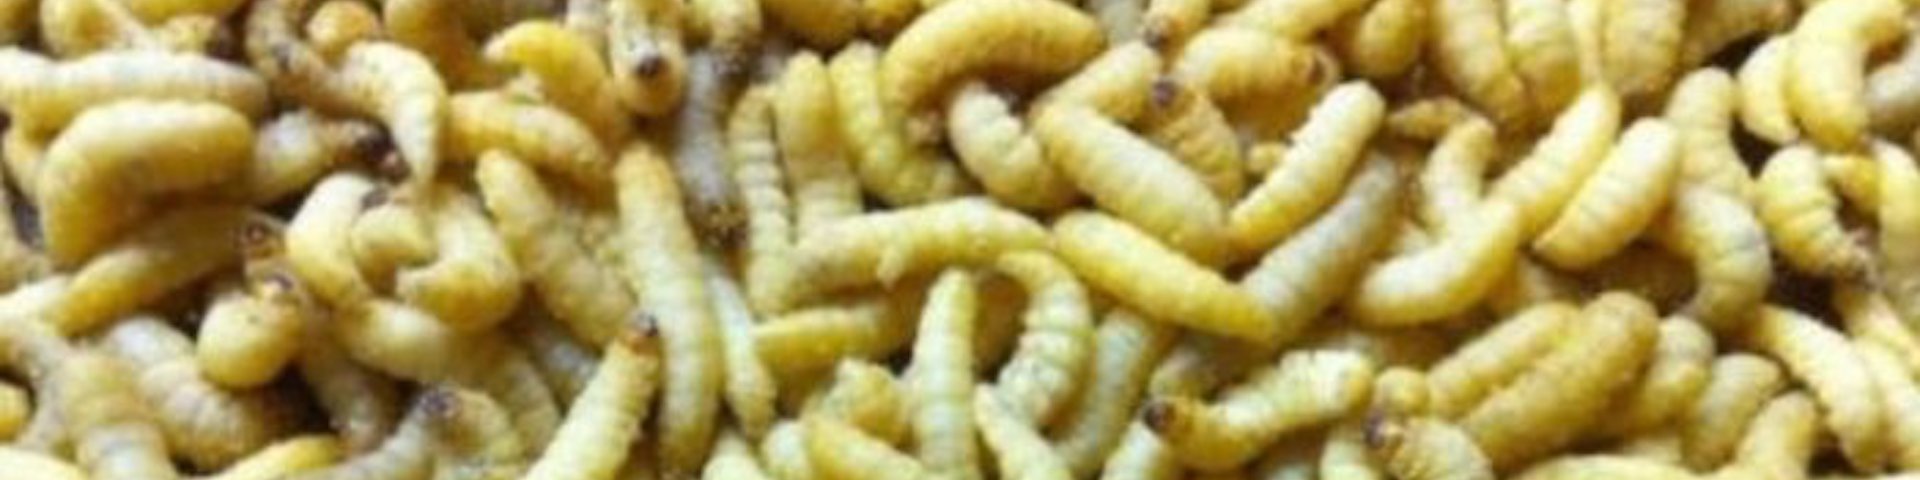 download wax worms for ice fishing